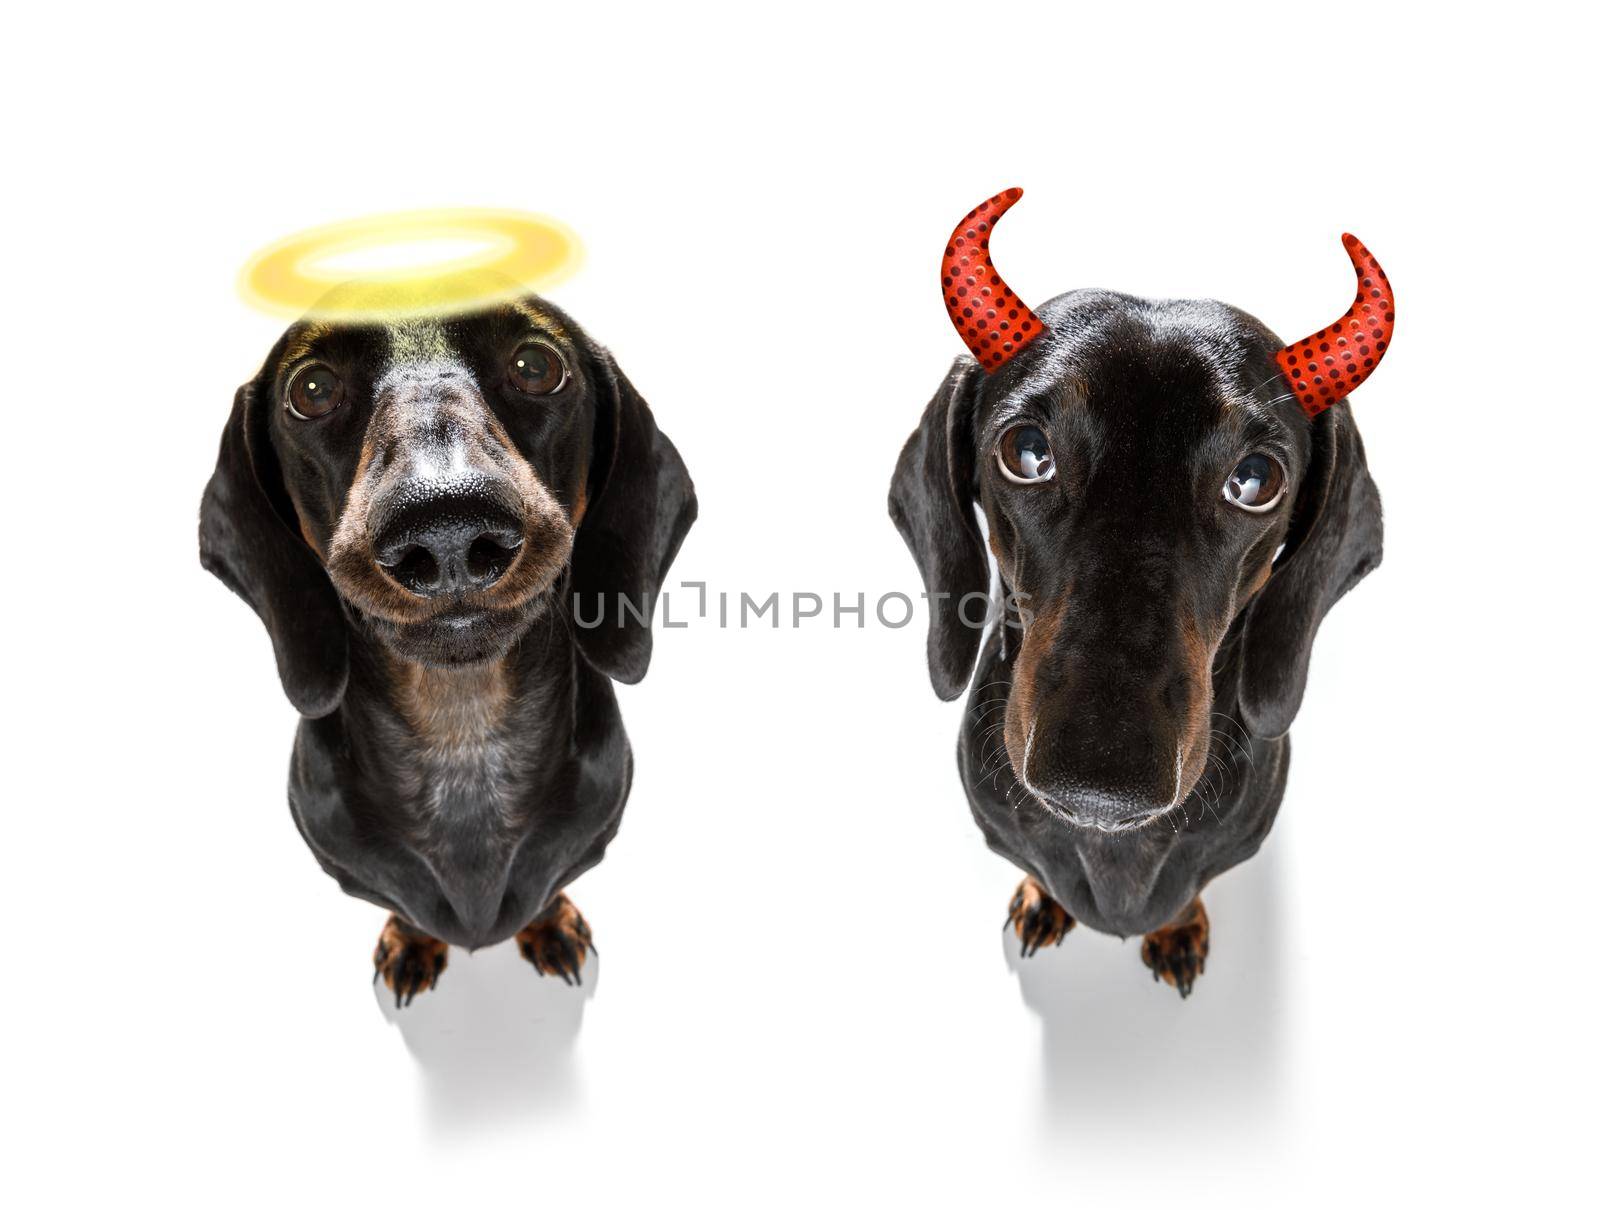 dachshund sausage dog sit as a ghost for halloween sitting   at with pumpkin lantern or  light , scary and  angel with halo spooky  right or wrong , good and bad